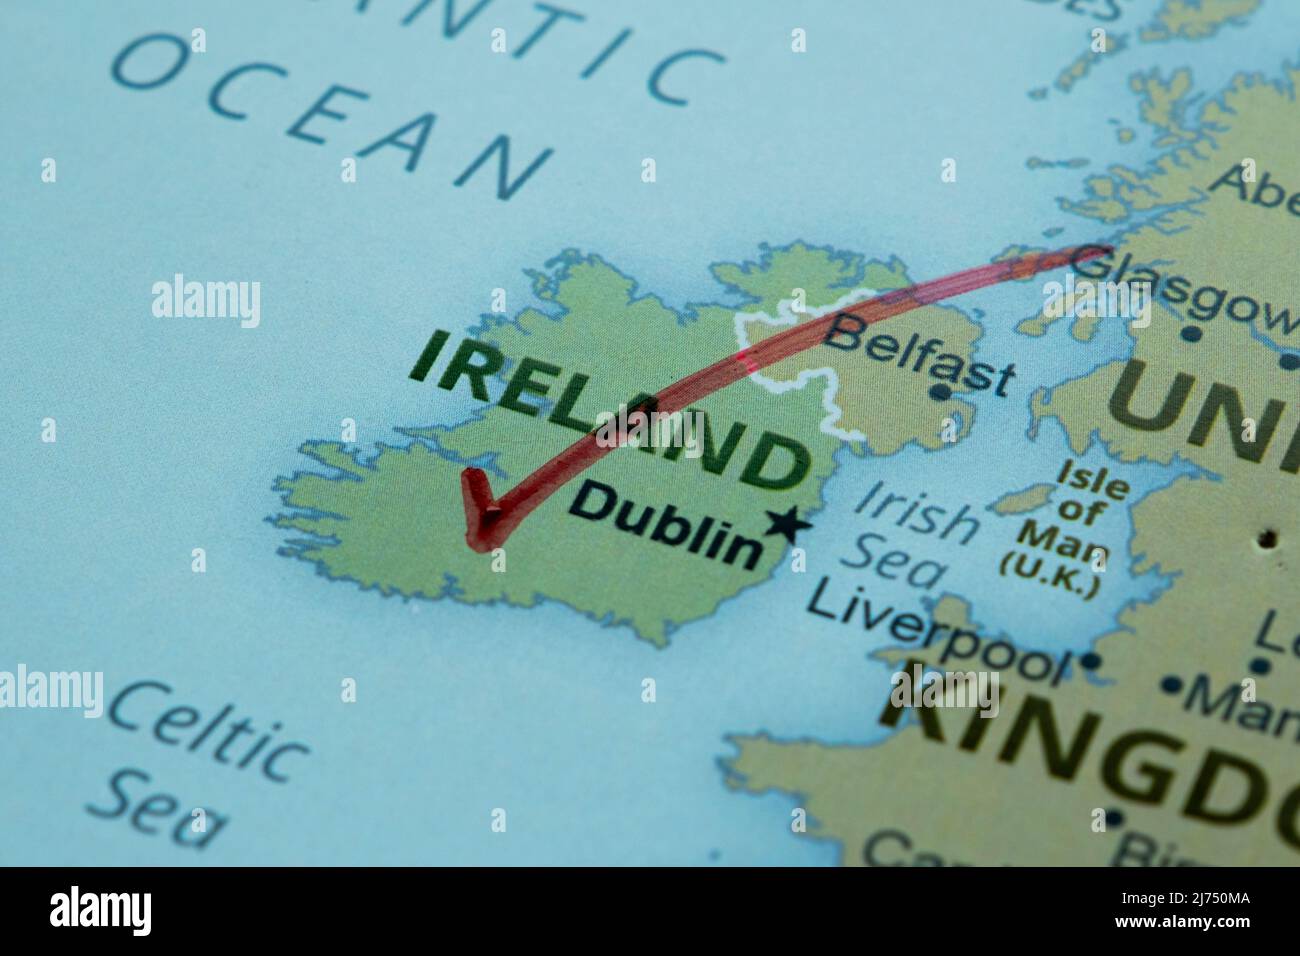 Ireland location and region on map marked with a pen, Great Britain Dublin travel idea on map with red tick, vacation and road trip concept Stock Photo